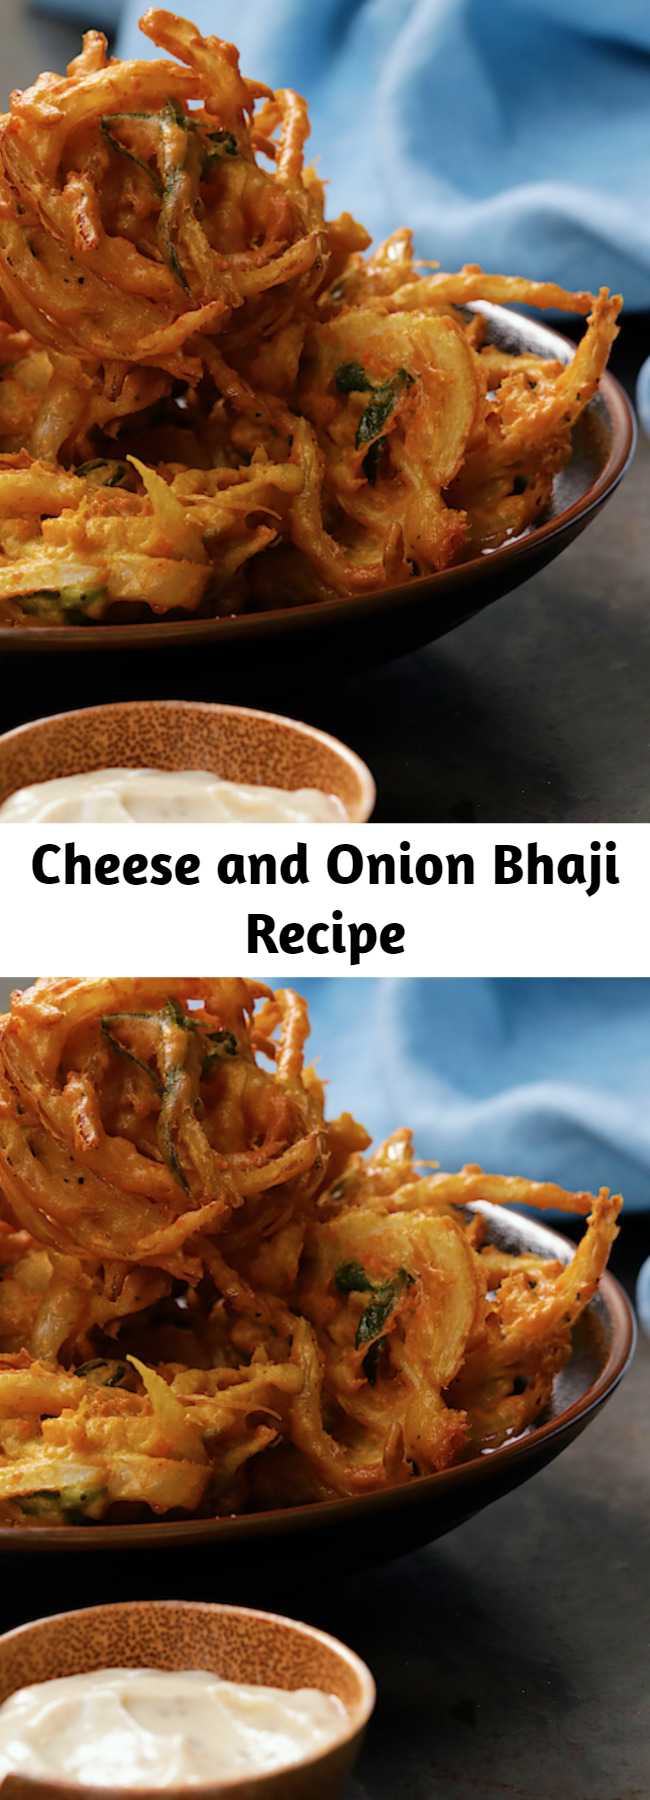 Cheese and Onion Bhaji Recipe - The only cheese and onion bhaji recipe you'll ever need!